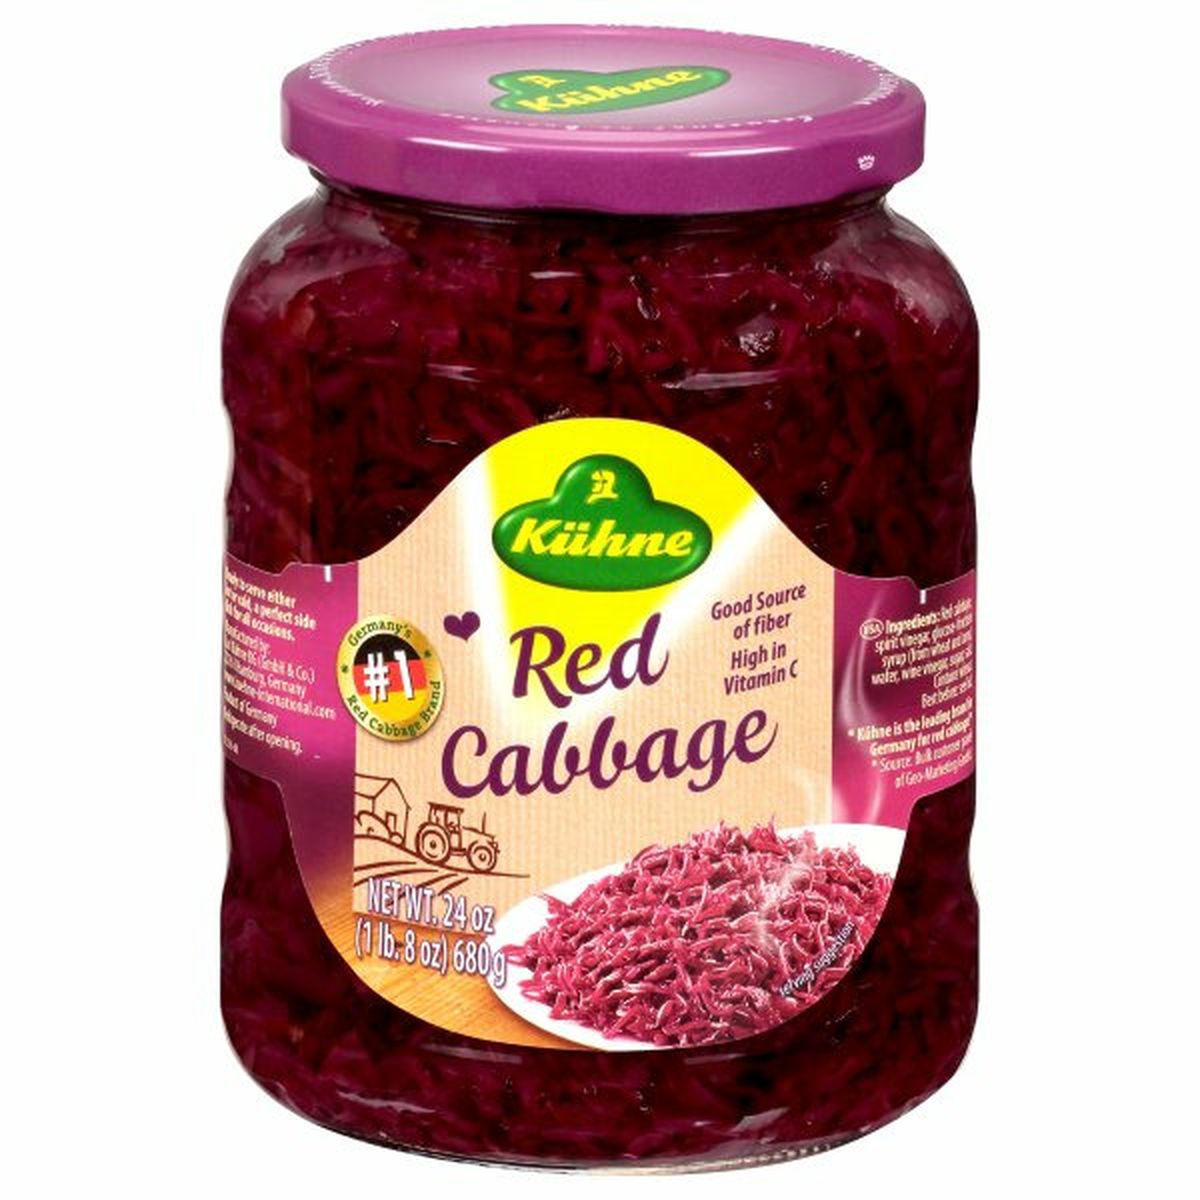 Calories in KÃ¼hne Red Cabbage